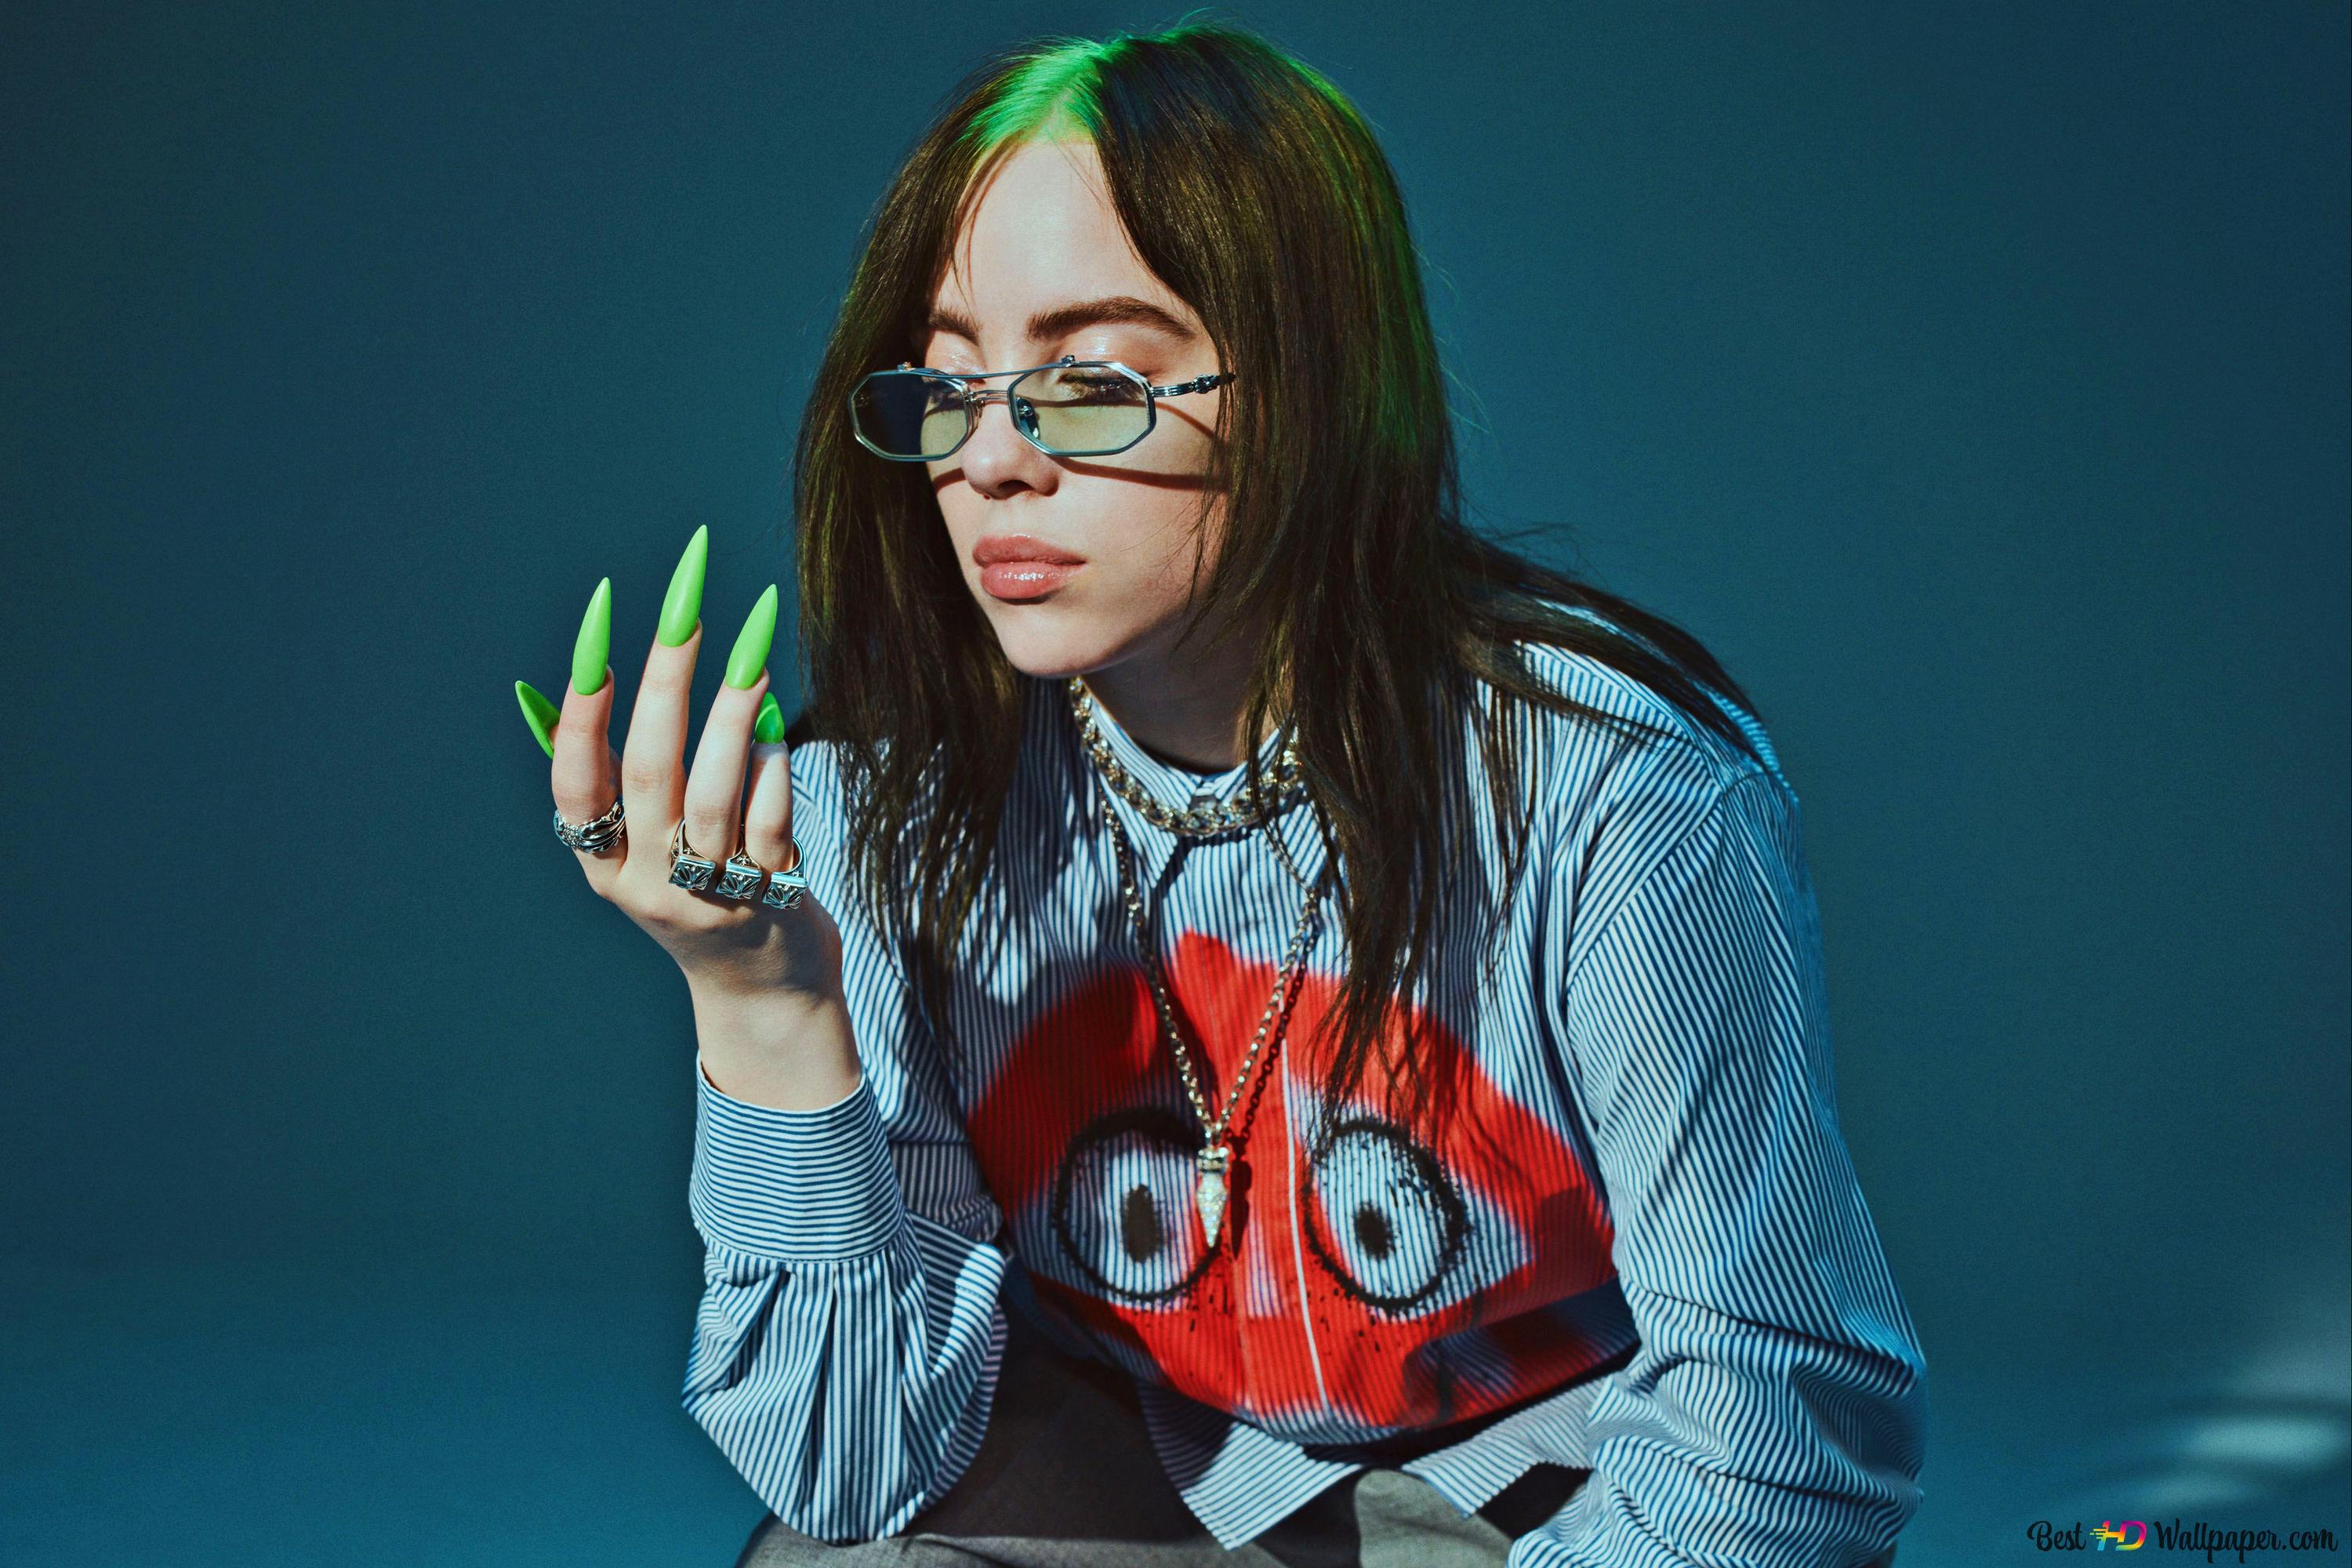 A woman with green nails and glasses - Billie Eilish